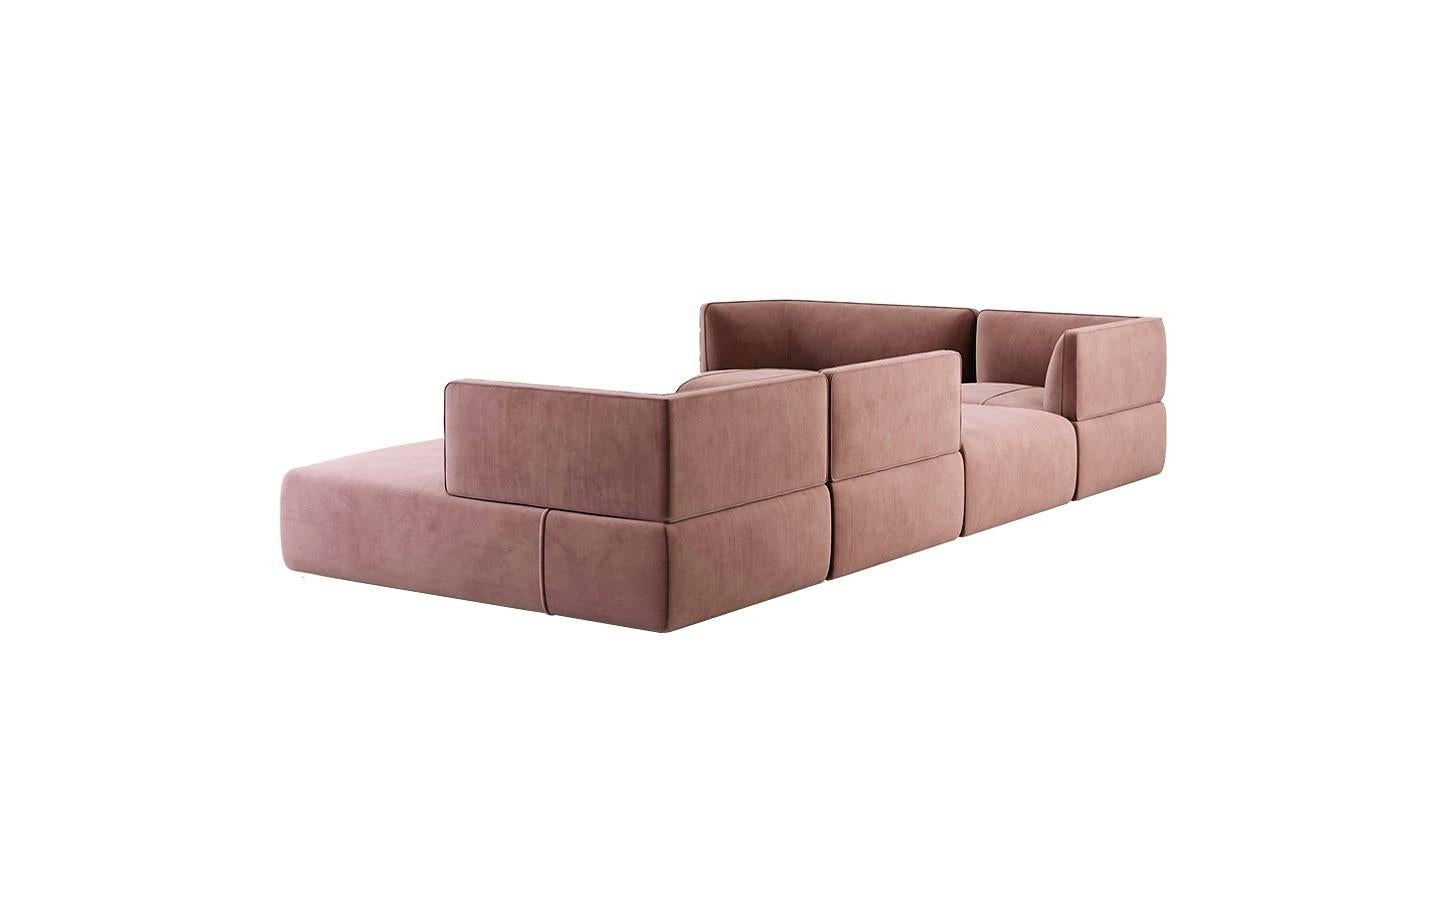 Tailor made and fully upholstered sectional sofa offered in a selection of luxurious, velvet fabrics.
Shown with salmon cotton velvet. All hardwood frame with advanced comfort spring suspension. The seat and back cushions filled with premium